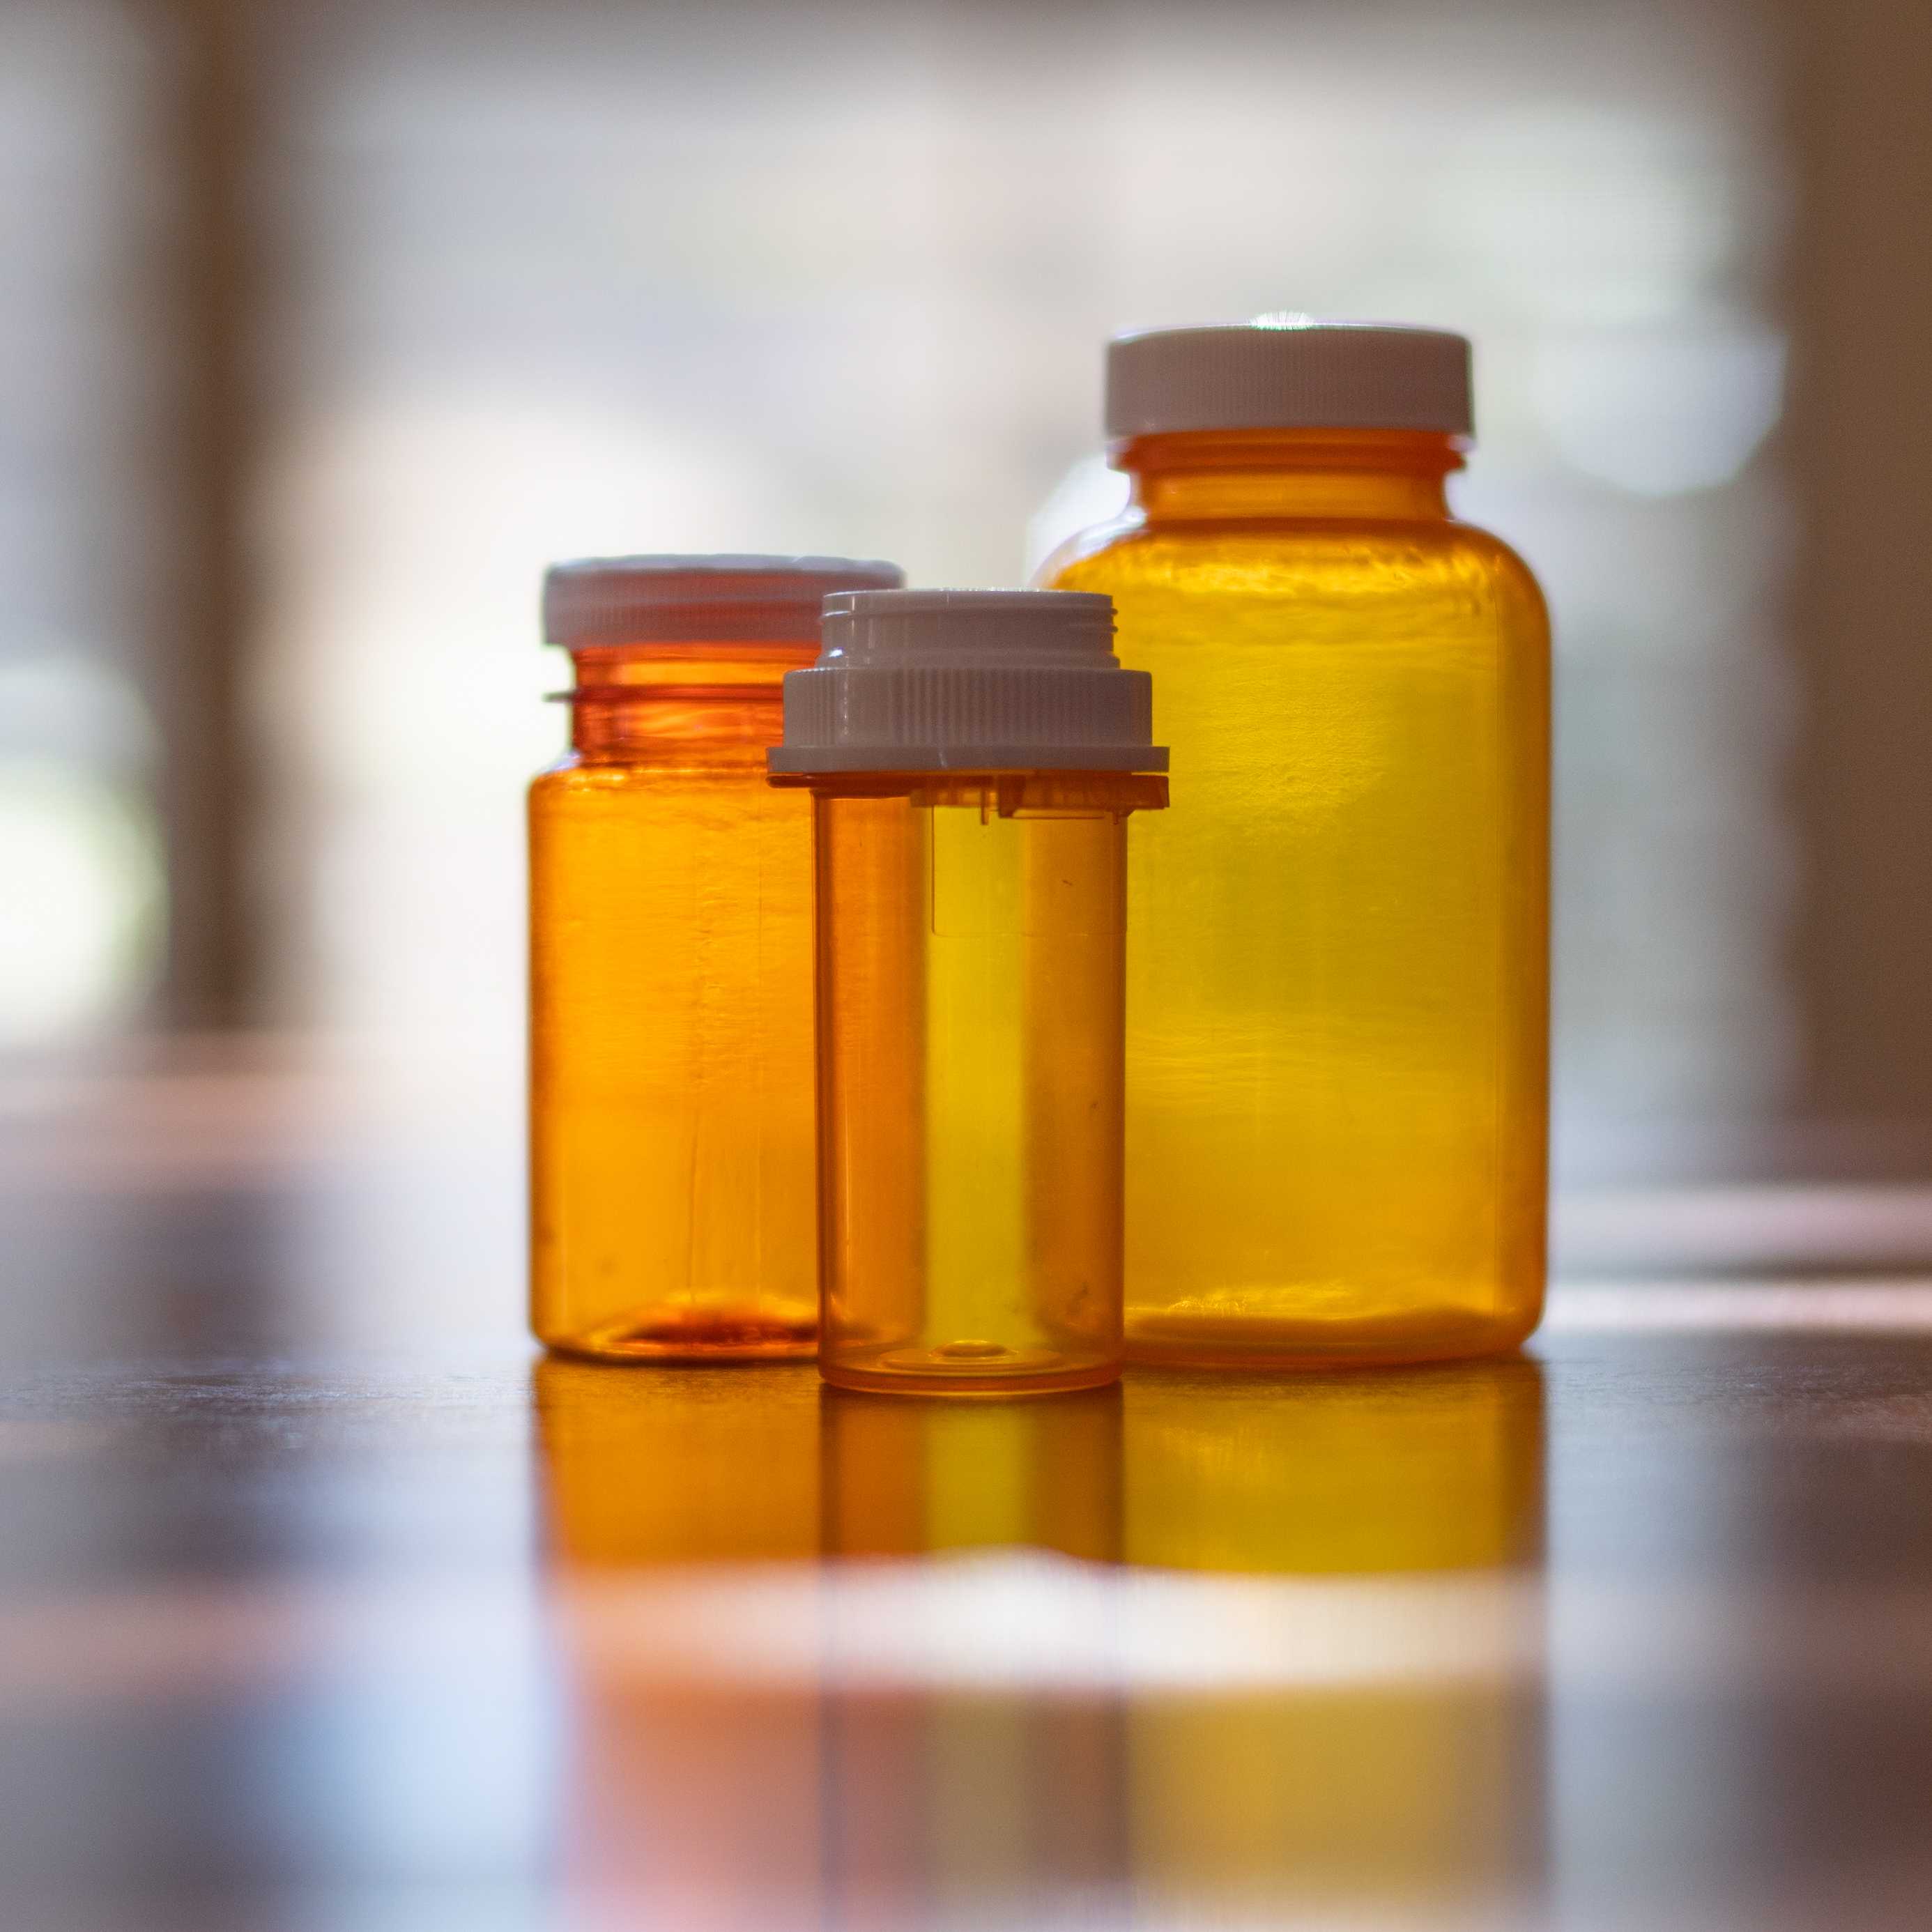 An image of medicine bottles on a table